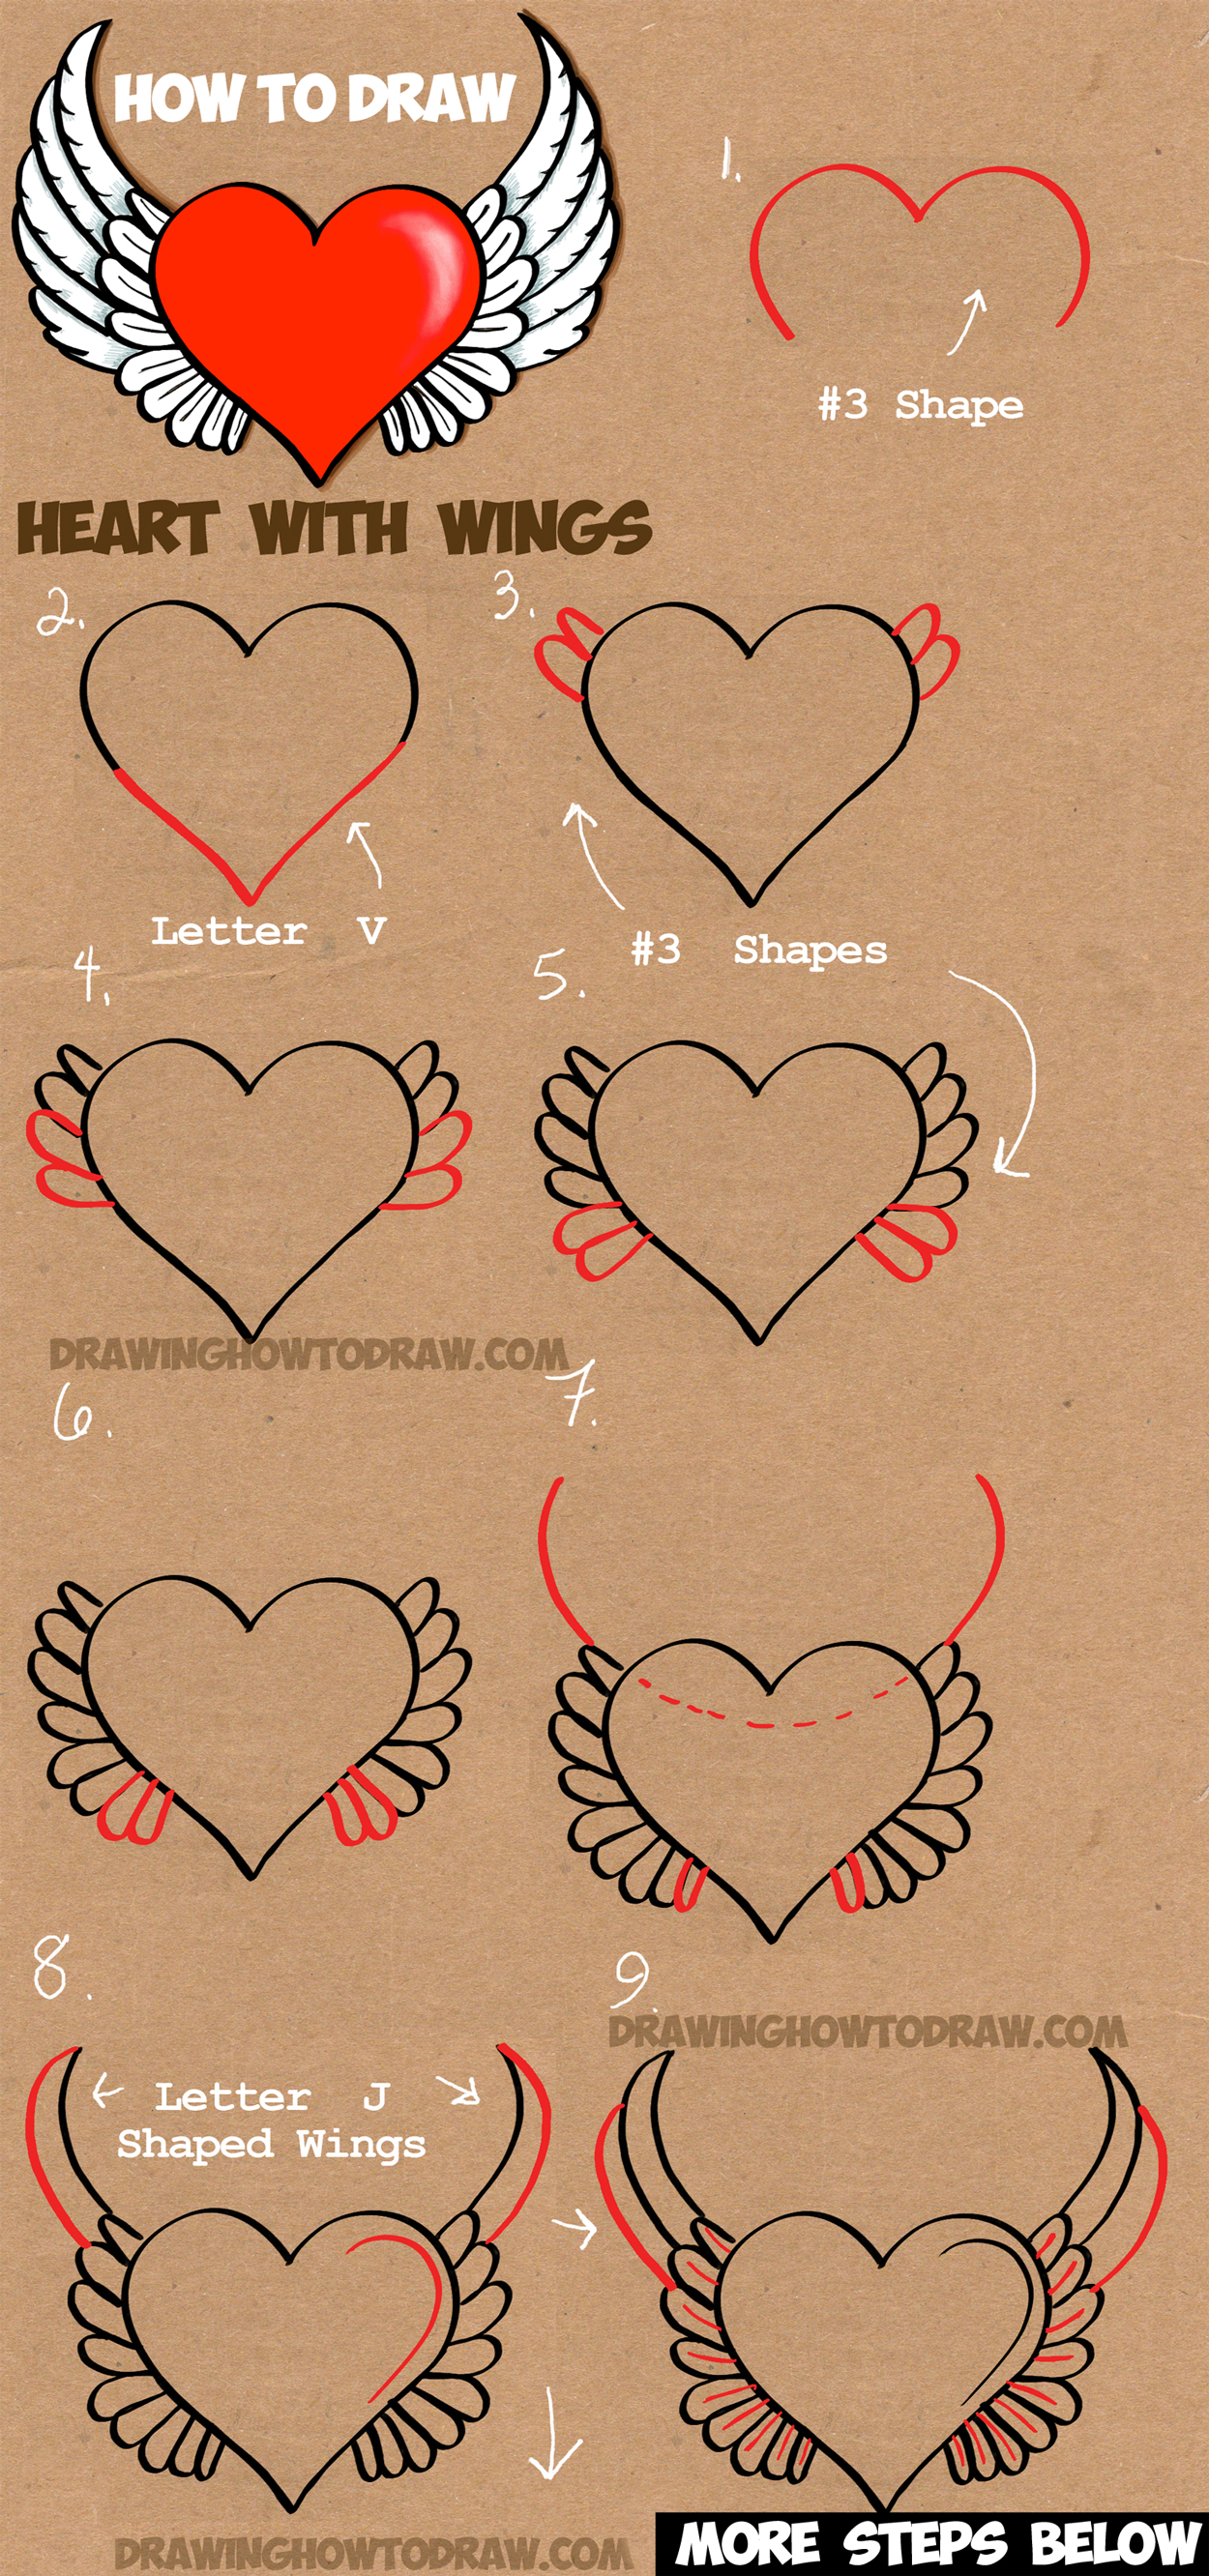 how to draw a heart with wings step by step tutorial